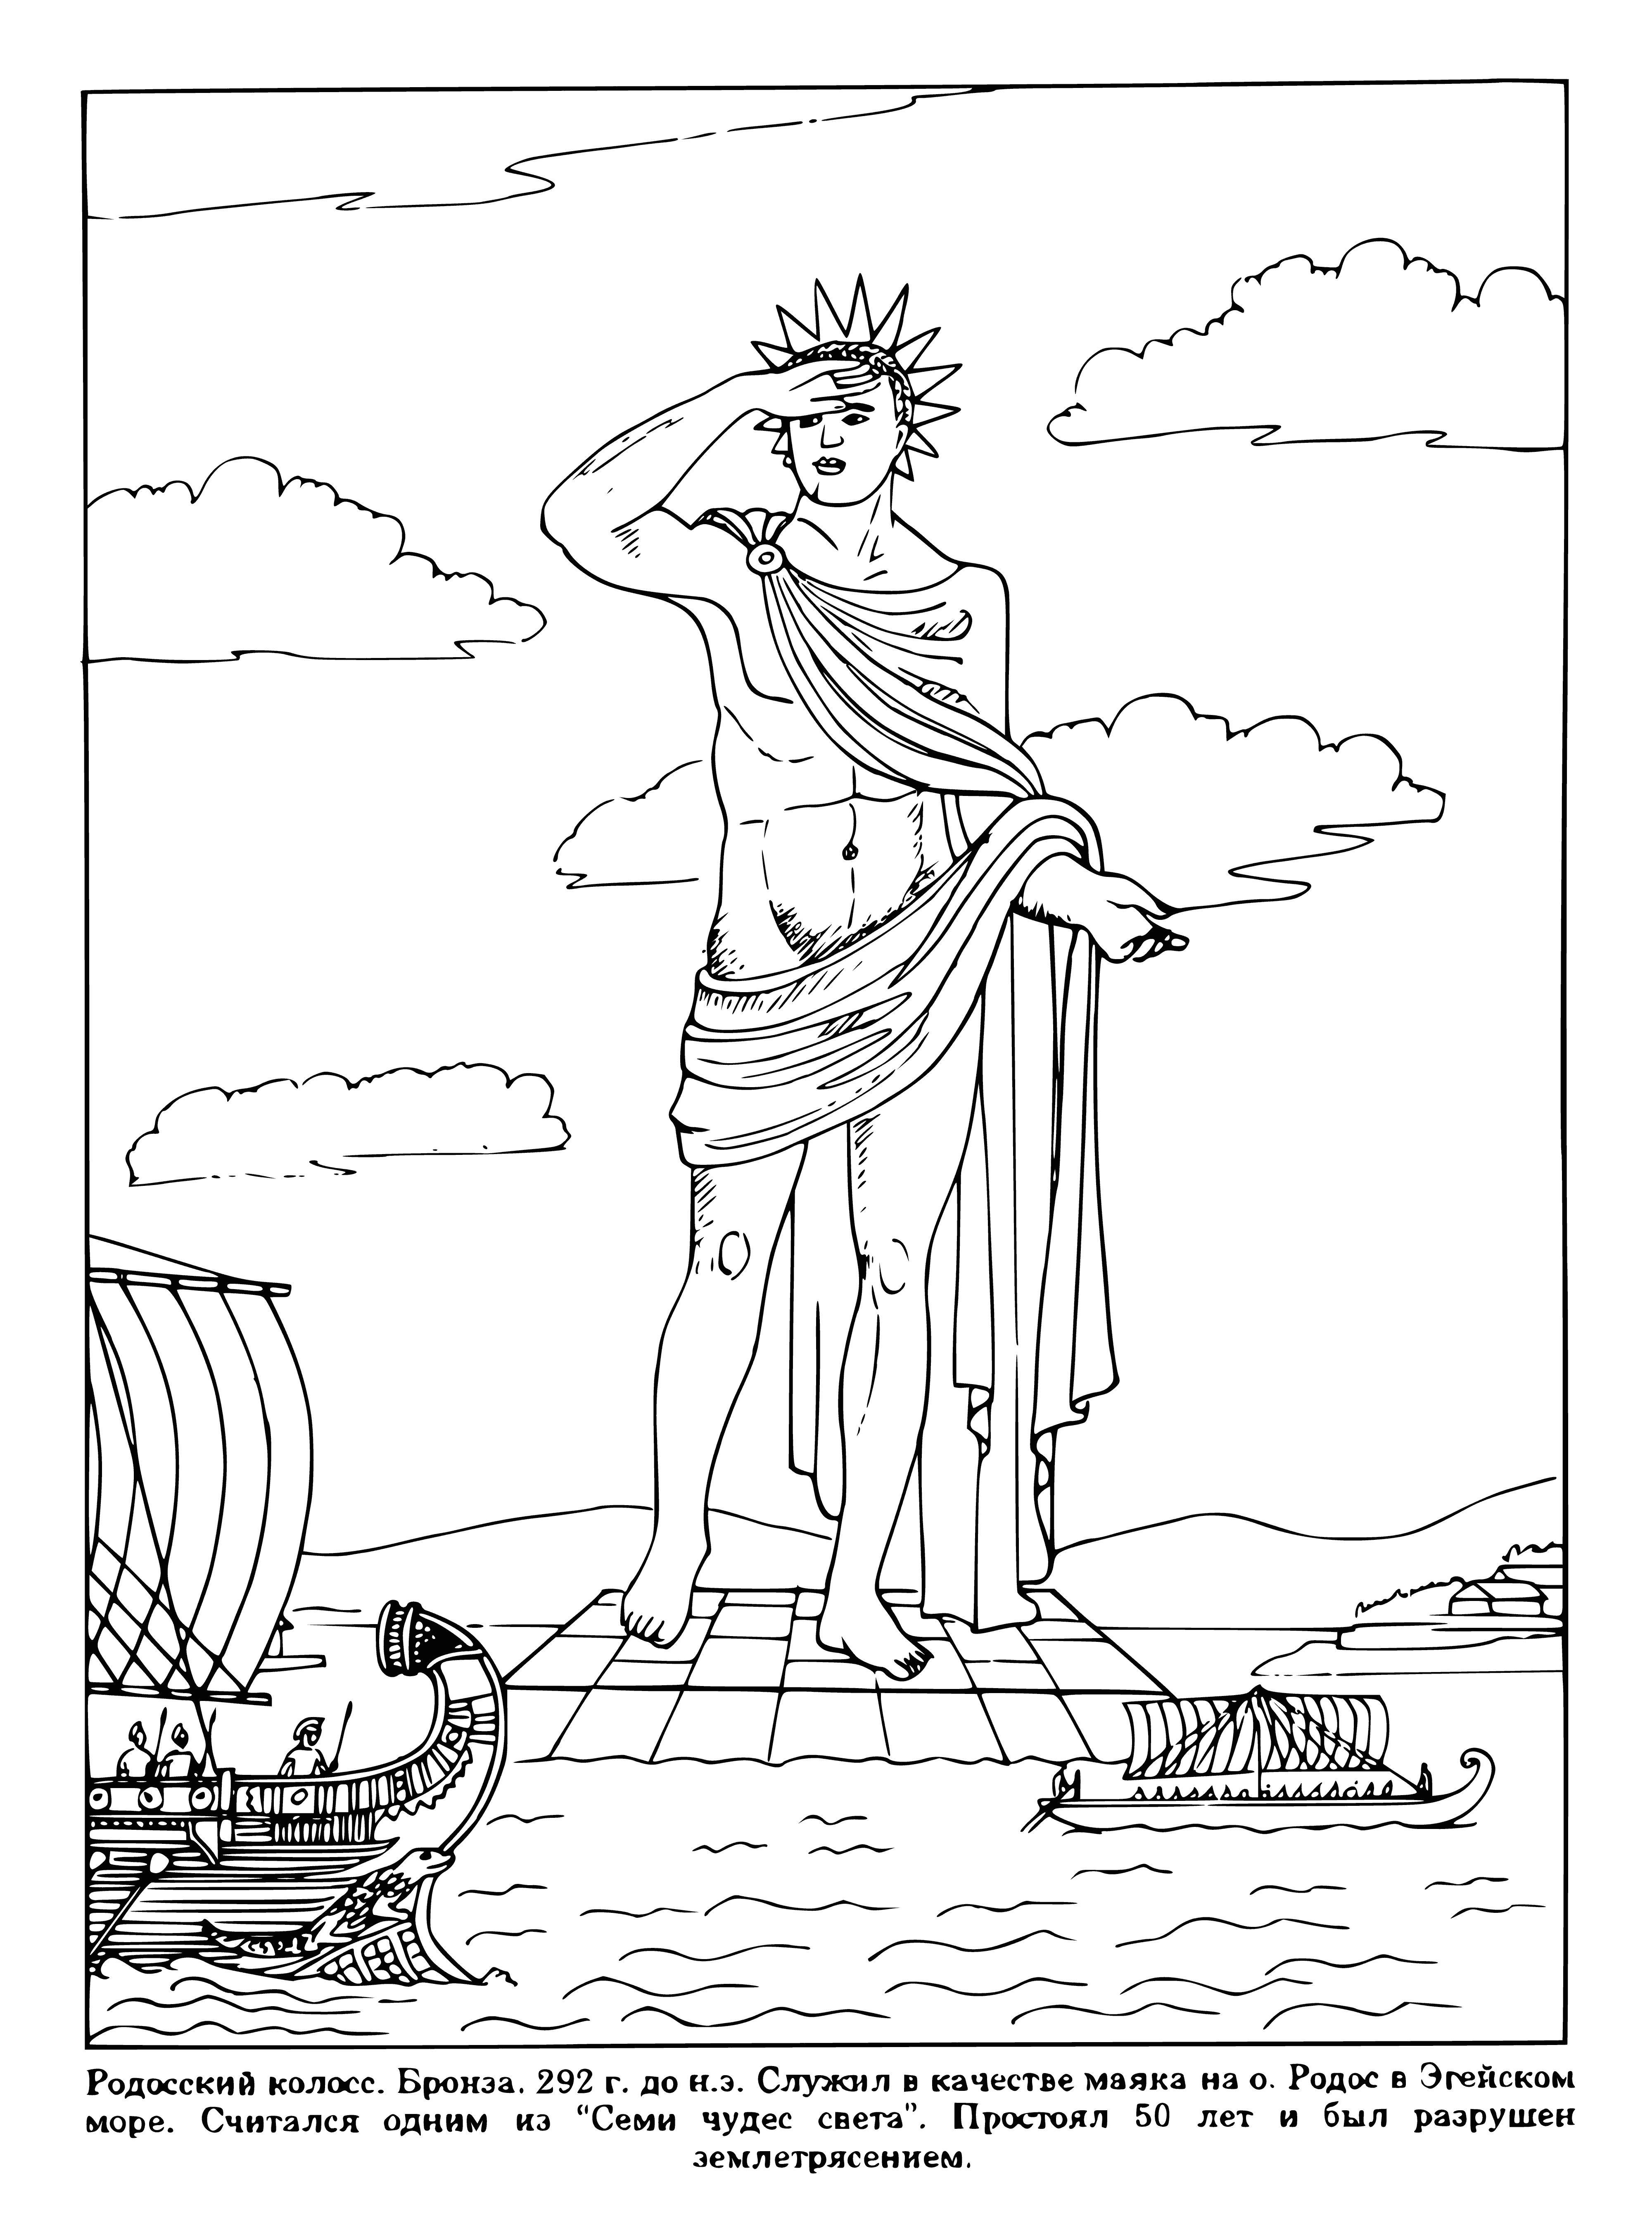 coloring page: Mythic Colossus of Rhodes is a gigantic, muscular man wearing a loincloth, short curly hair, beard & mustache. Looking to the side with a serious expression.